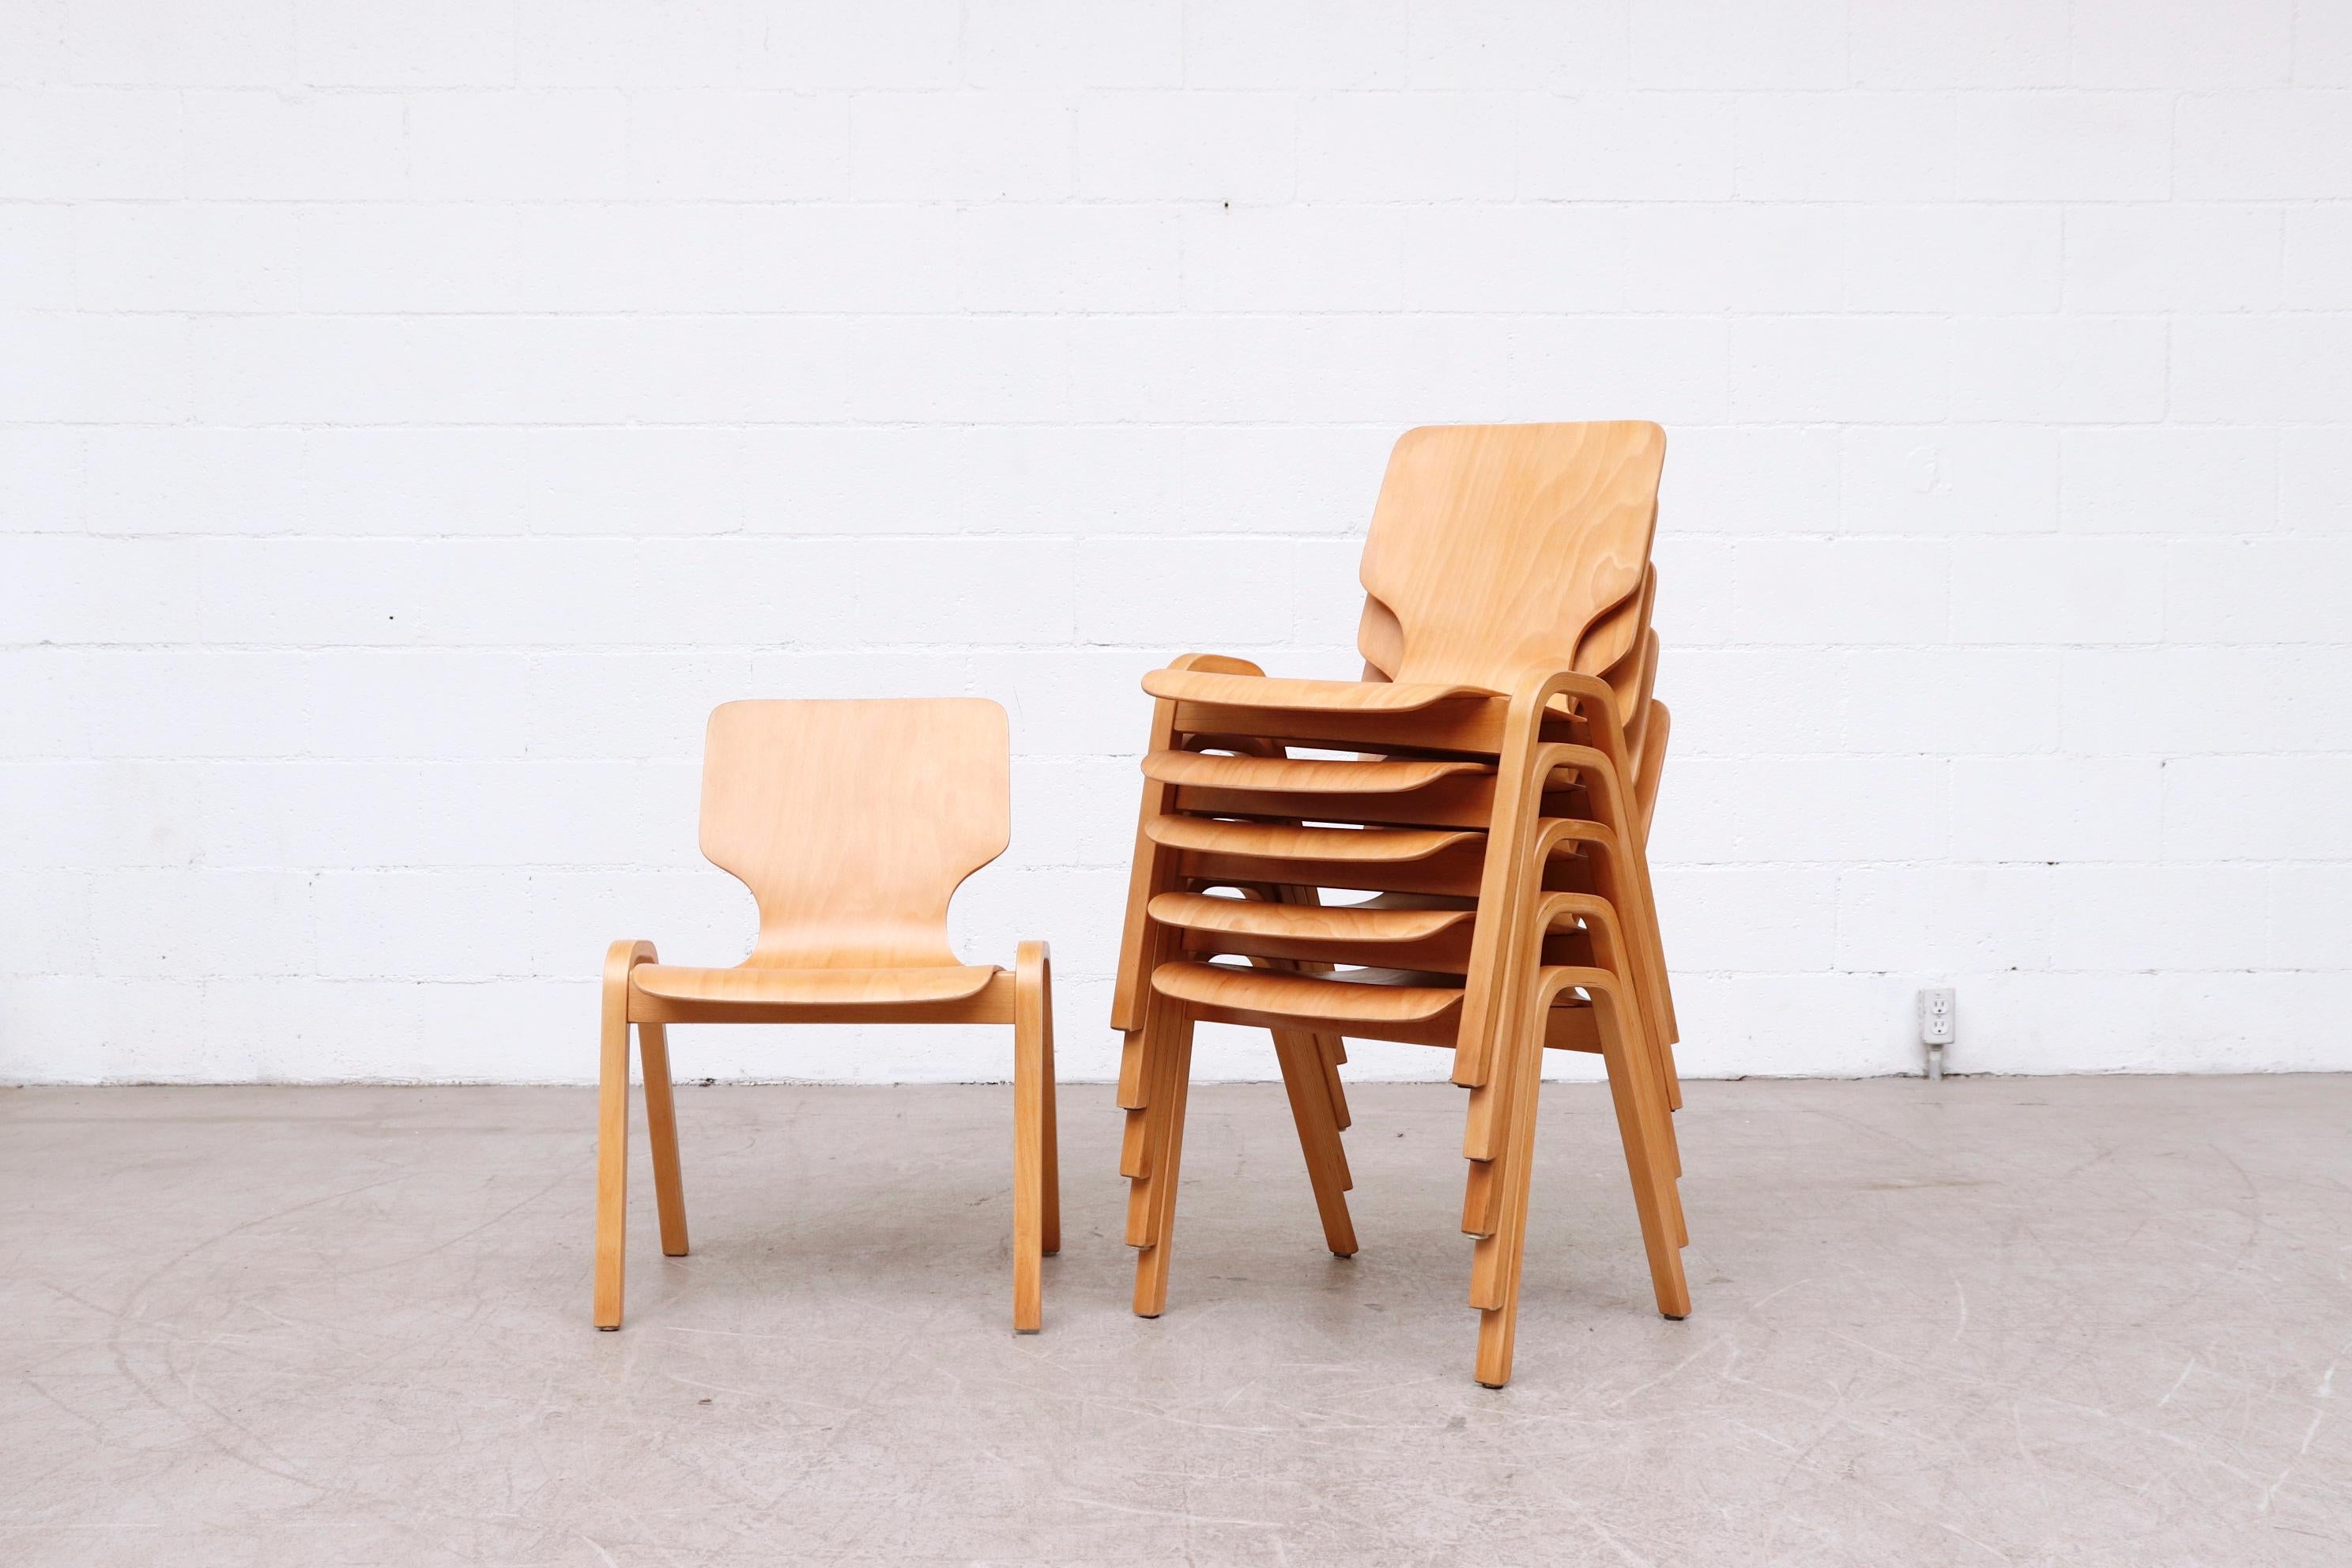 Delicate Fritz Hansen style single shell bentwood stacking dining chairs. Leg detail is inspired by Alvar Aalto. All in original condition with wear and scratching consistent with their age and use. Individually priced. Similar style chairs also